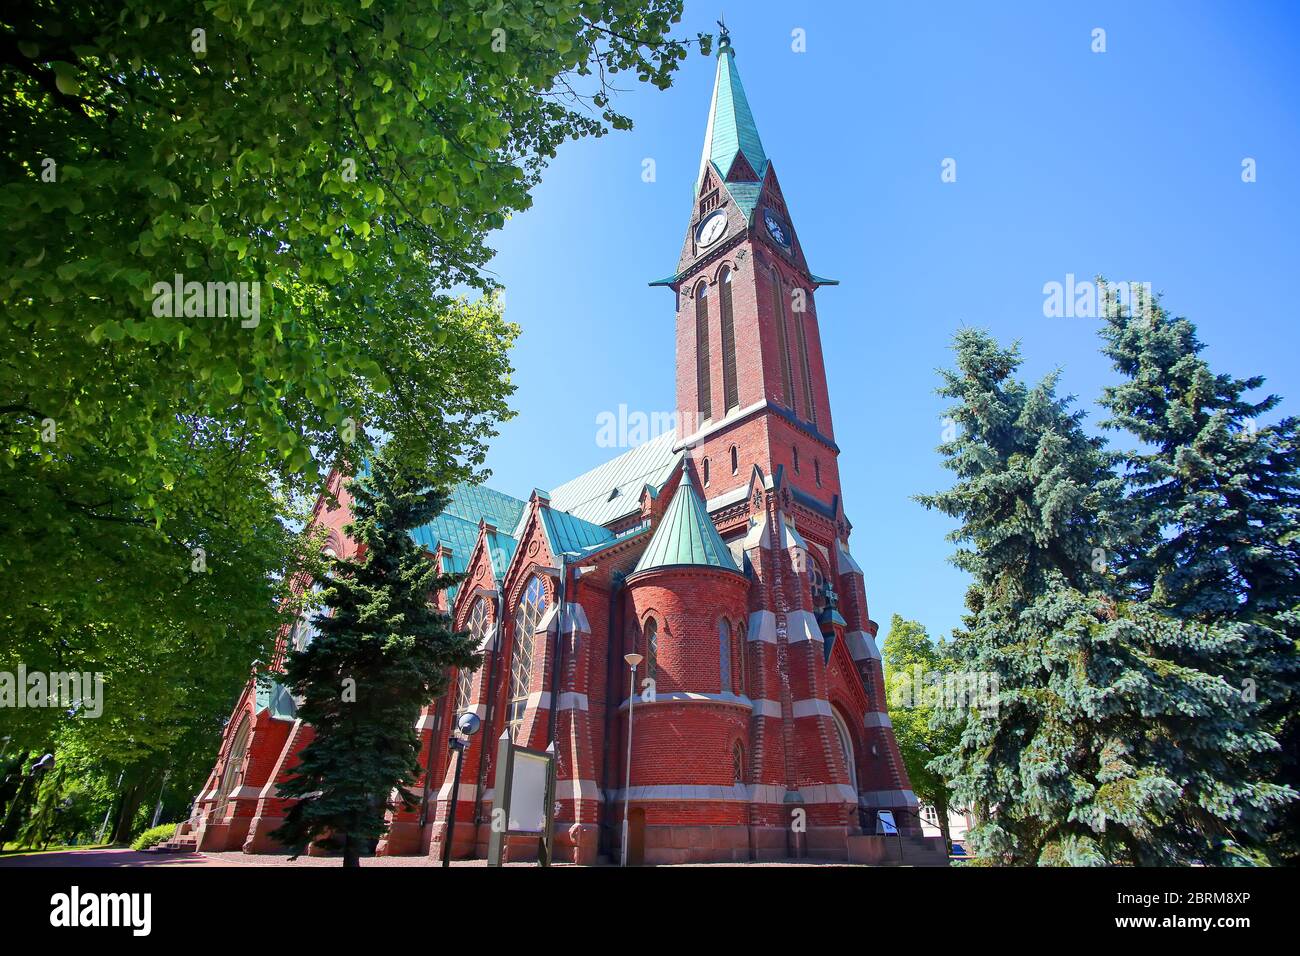 Kotka Church which was inaugurated in 1898. The Neo-Gothic church with its towers is an unusual red brick building in the Kotka cityscape, Finland. Stock Photo